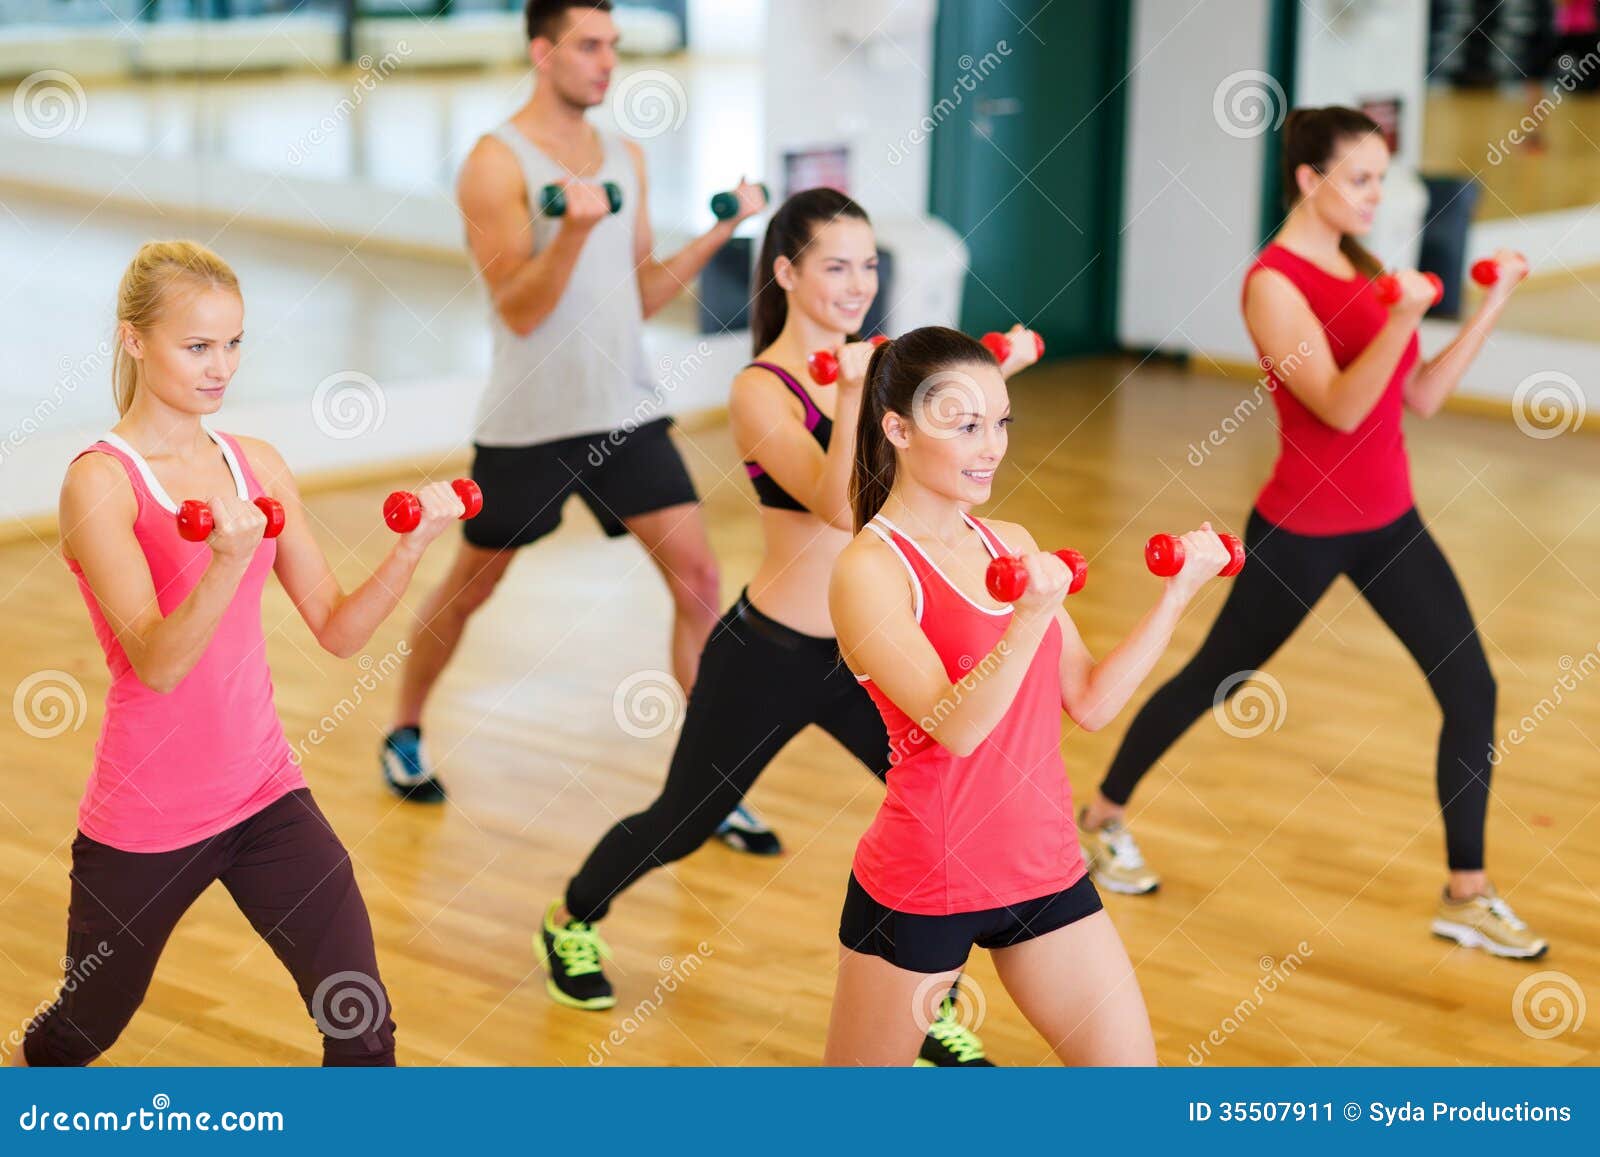 Image result for PEOPLE WORKING OUT